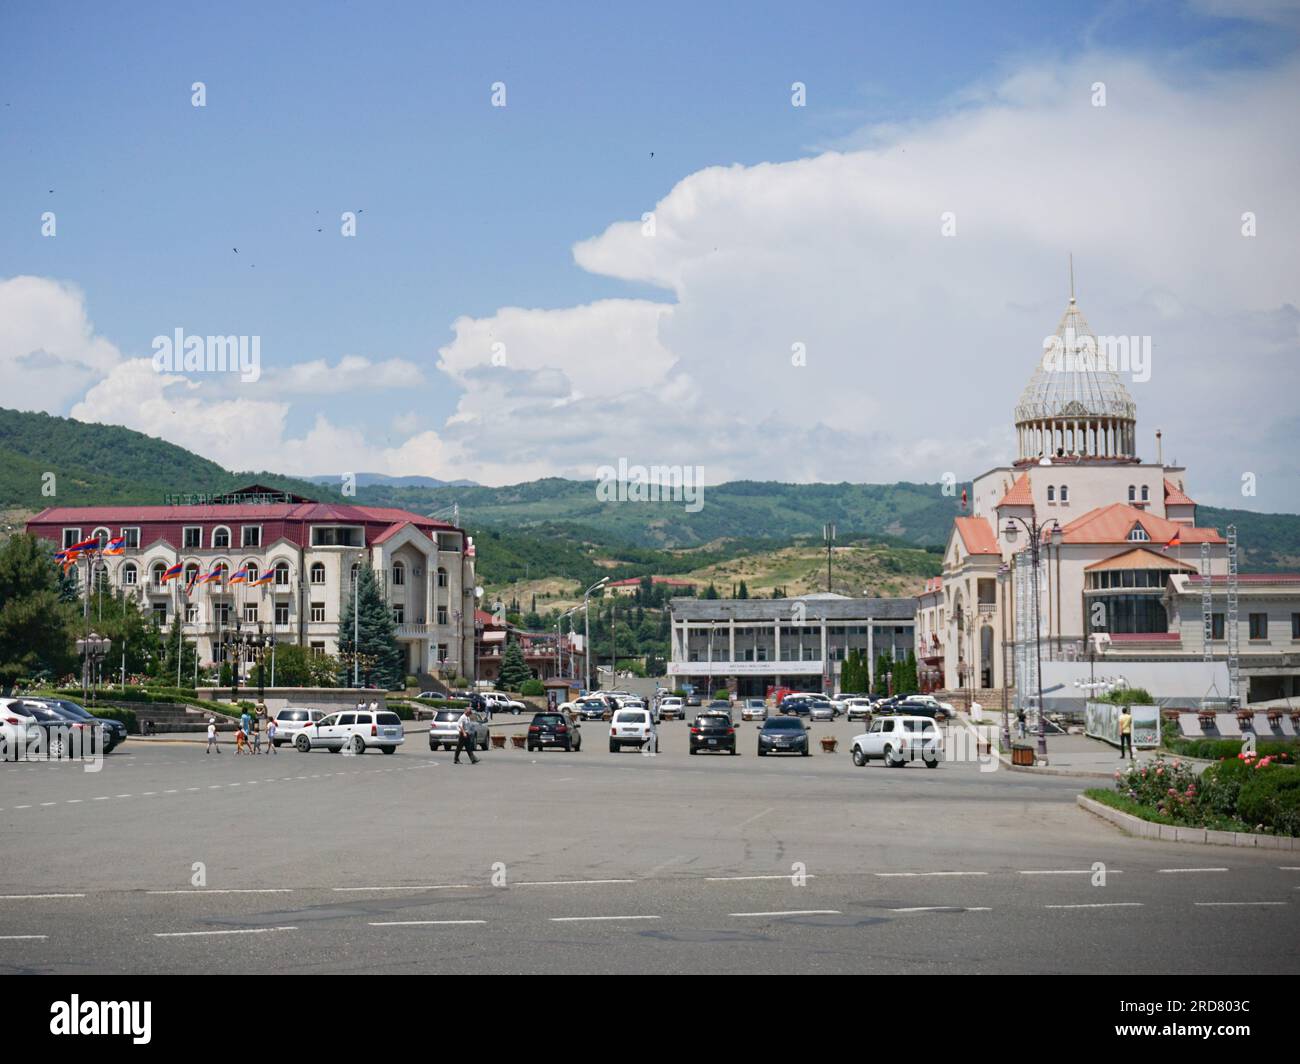 The view of Stepanakert, Nagorno-Karabakh during daytime. The unrecognised yet de facto independent country in South Caucasus, Nagorno-Karabakh (also known as Artsakh) has been in the longest-running territorial dispute between Azerbaijan and Armenia in post-Soviet Eurasia since the collapse of Soviet Union. It is mainly populated by ethnic Armenians. Stock Photo